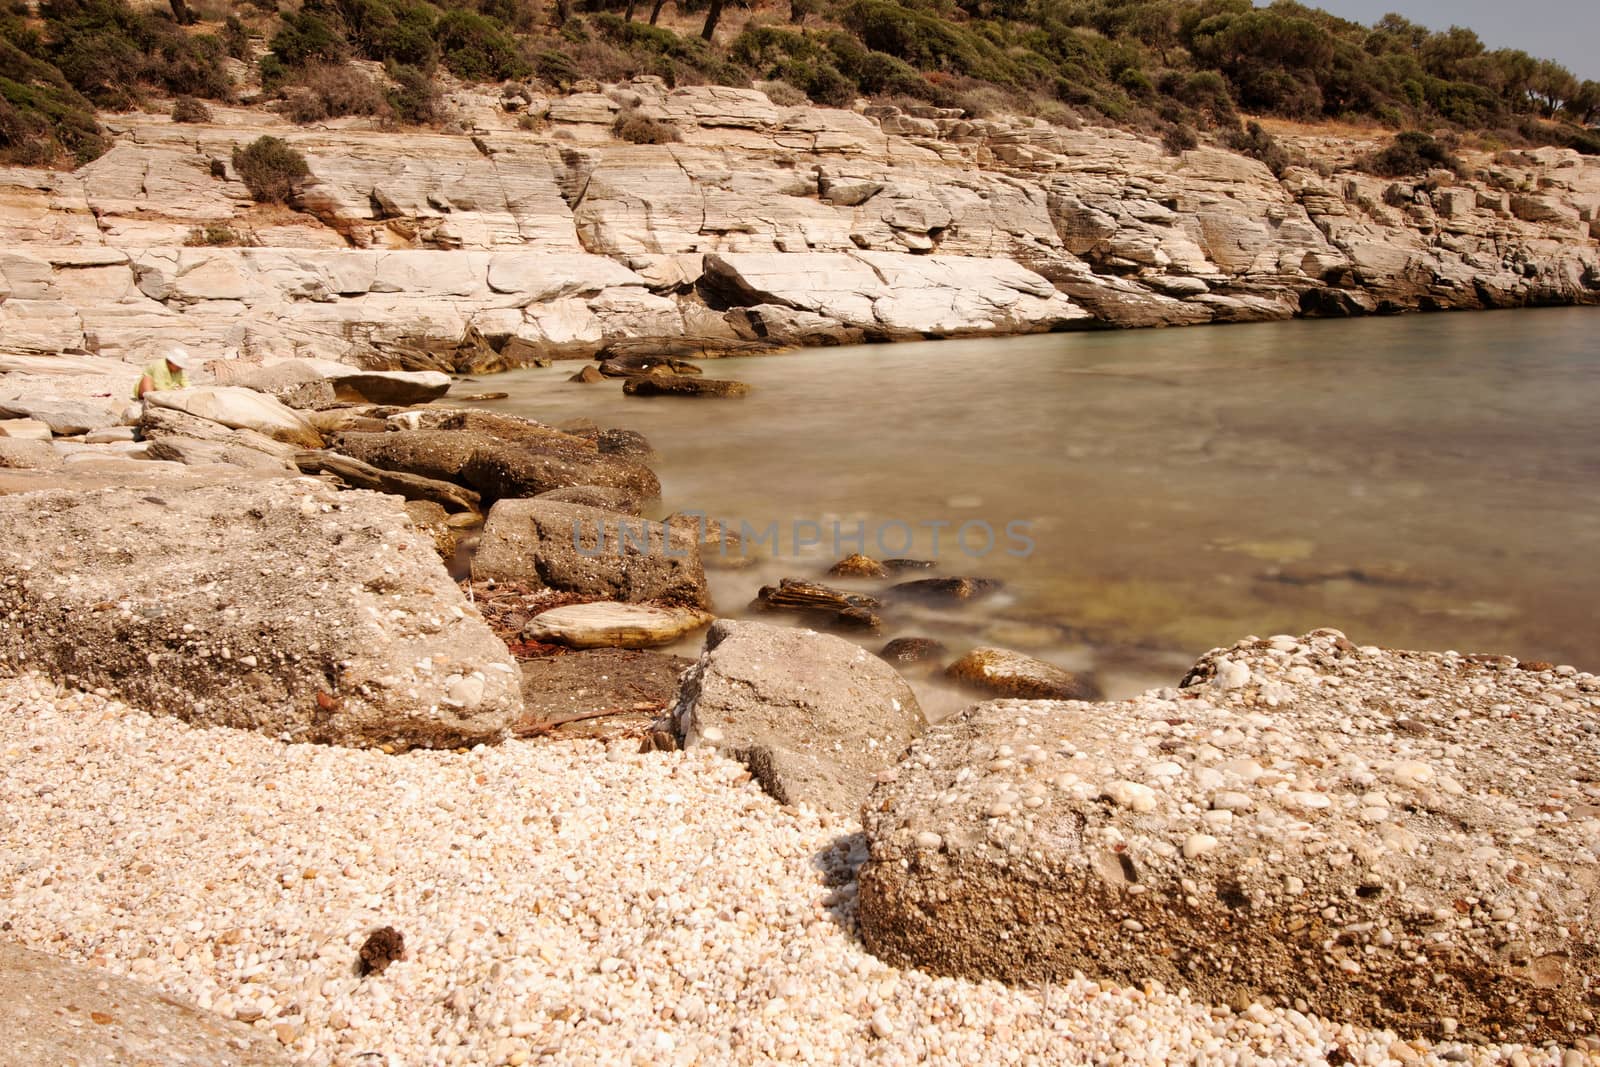 rocky beach with turquoise sea in greece thassos island